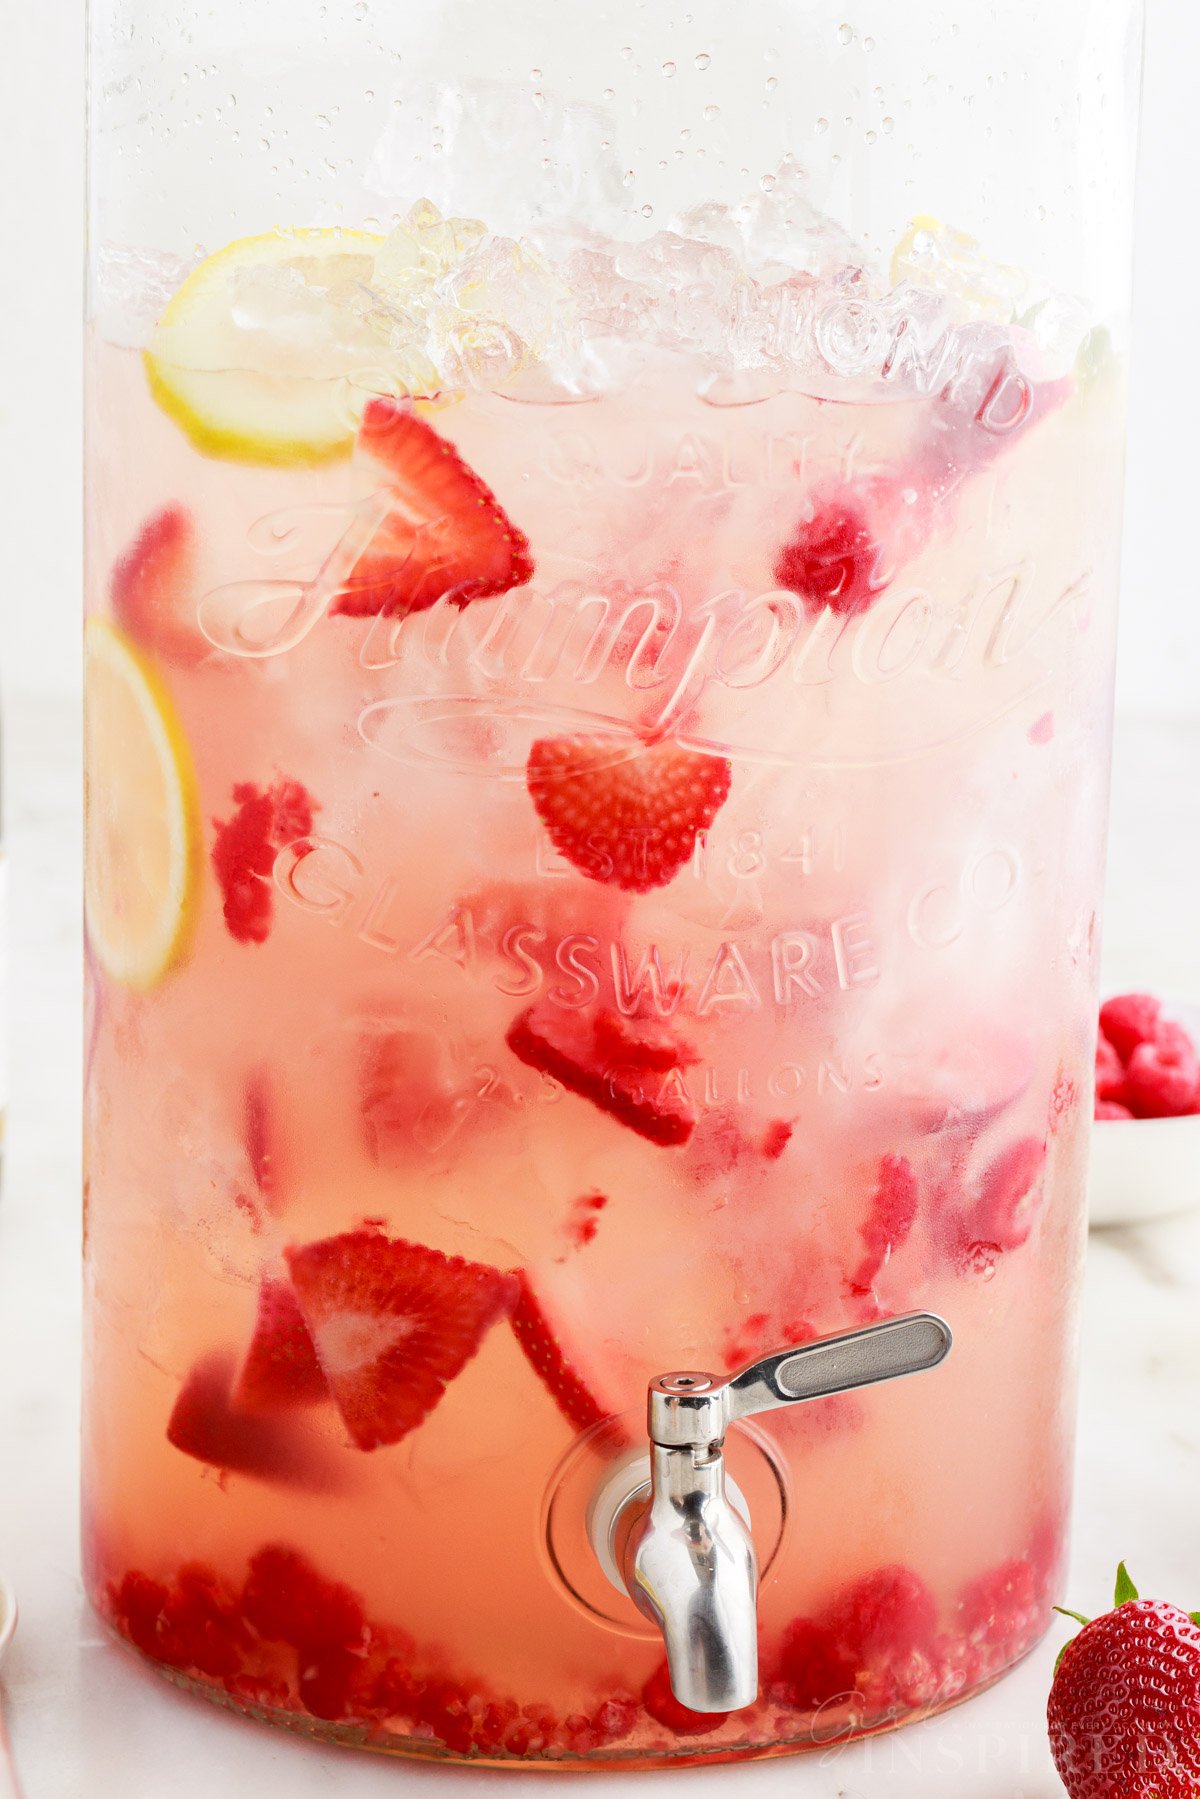 Large glass beverage dispenser full of strawberry sangria with fresh strawberries, raspberries, and lemon slices floating in it.